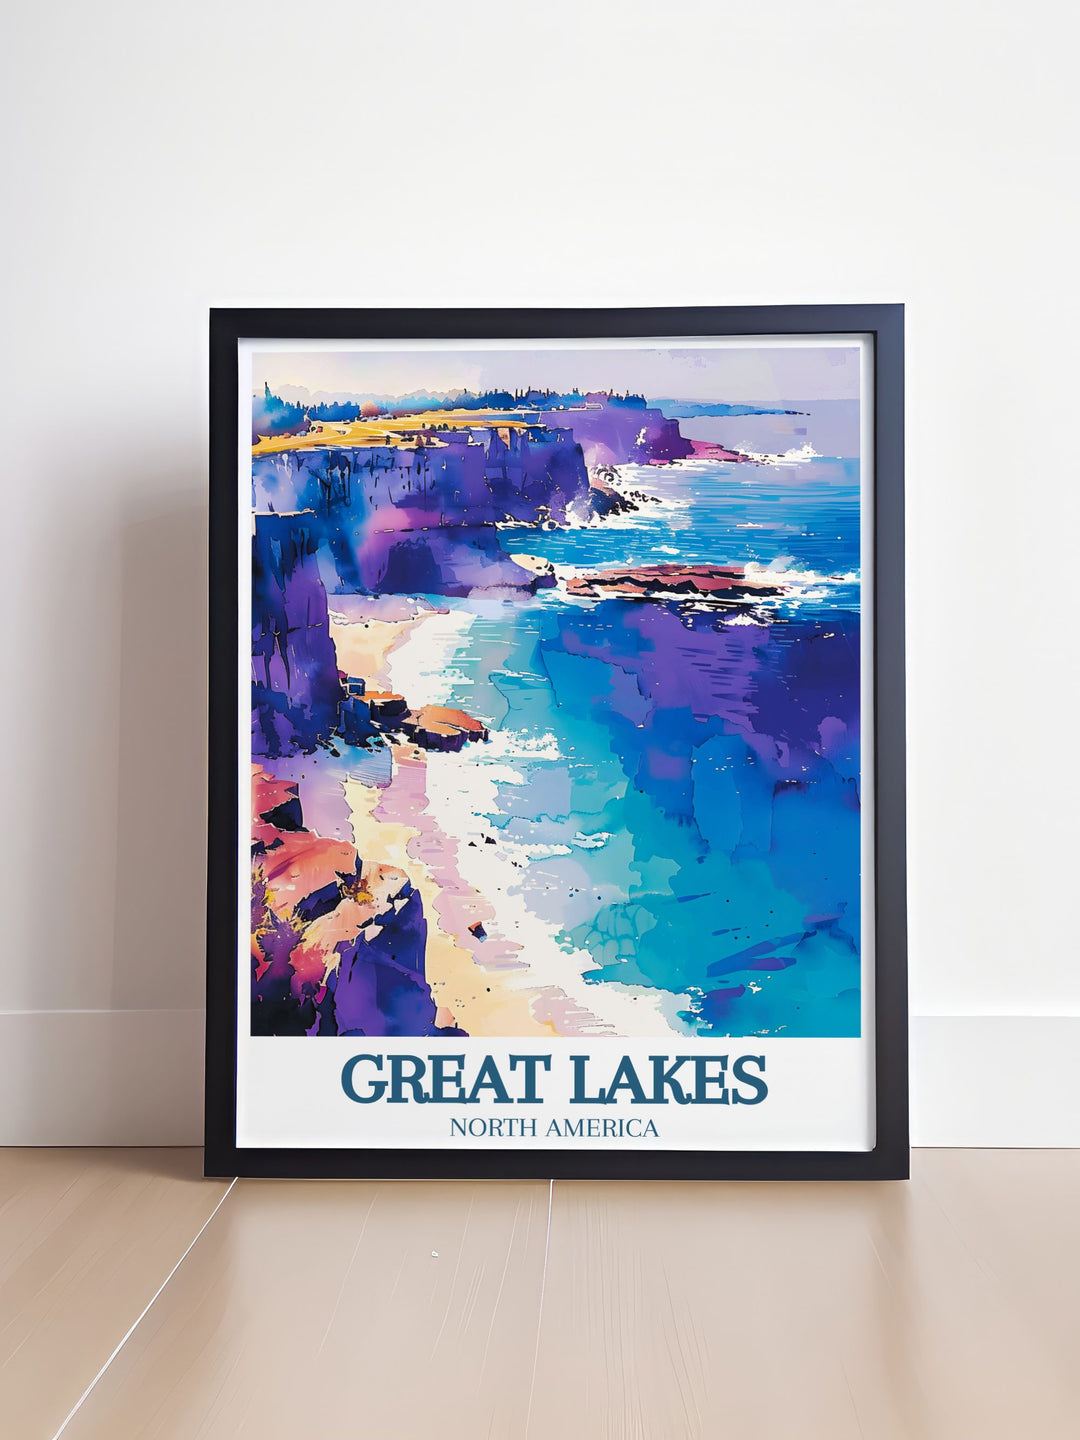 Depicting the historical significance of Kelleys Island, this art print offers a glimpse into the islands storied past and its natural attractions, perfect for history enthusiasts.